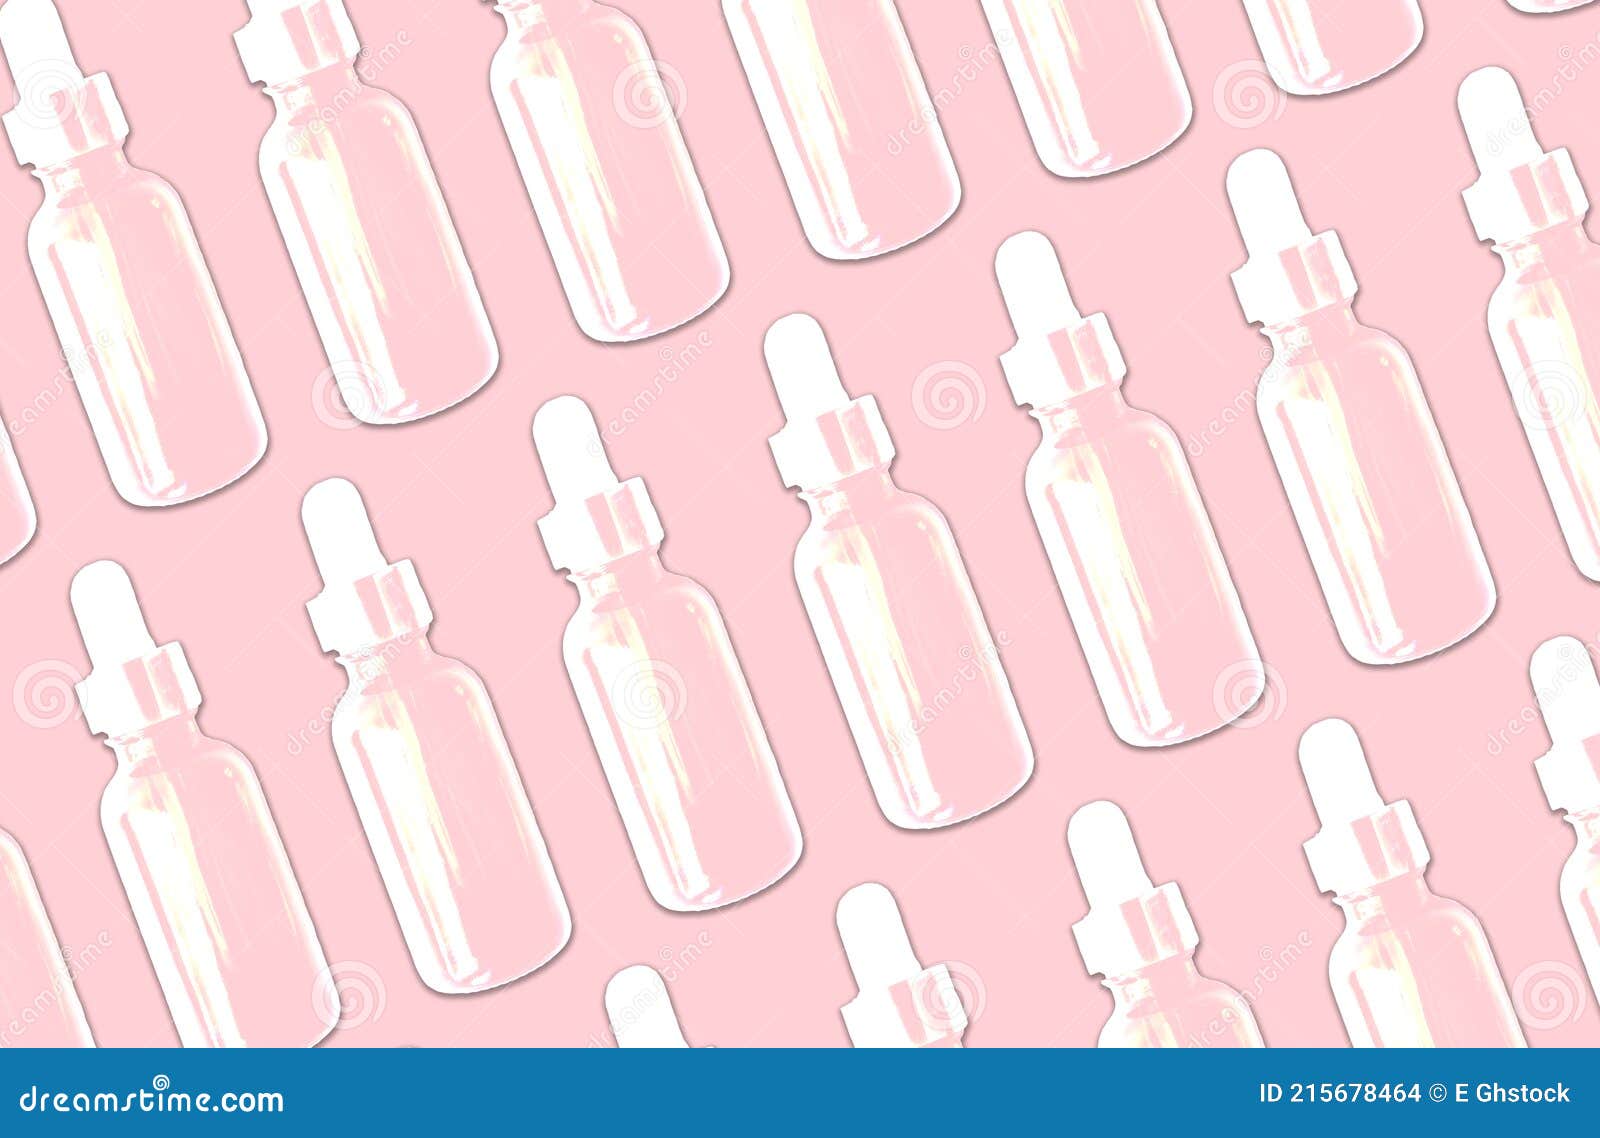  of essential oil serum glass bottle pattern  on pink background. natural serums. cosmetic concept